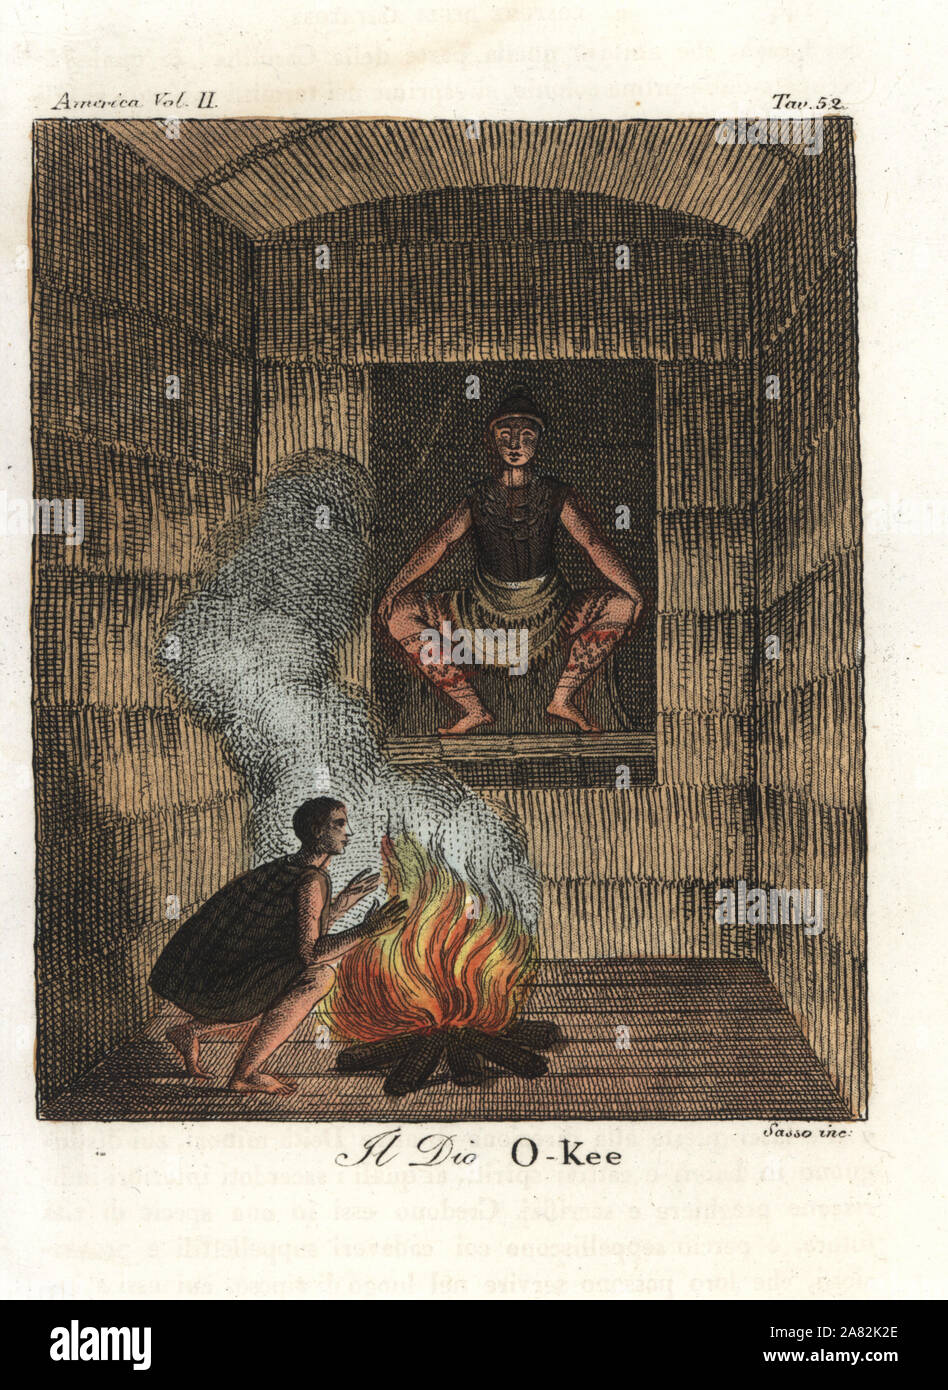 Native American making an offering at a shrine to the Powhatan god Okeus (Okee) in Virginia. Handcoloured copperplate engraving by Sasso from Giulio Ferrario's Ancient and Modern Costumes of all the Peoples of the World, Florence, Italy, 1837. Stock Photo